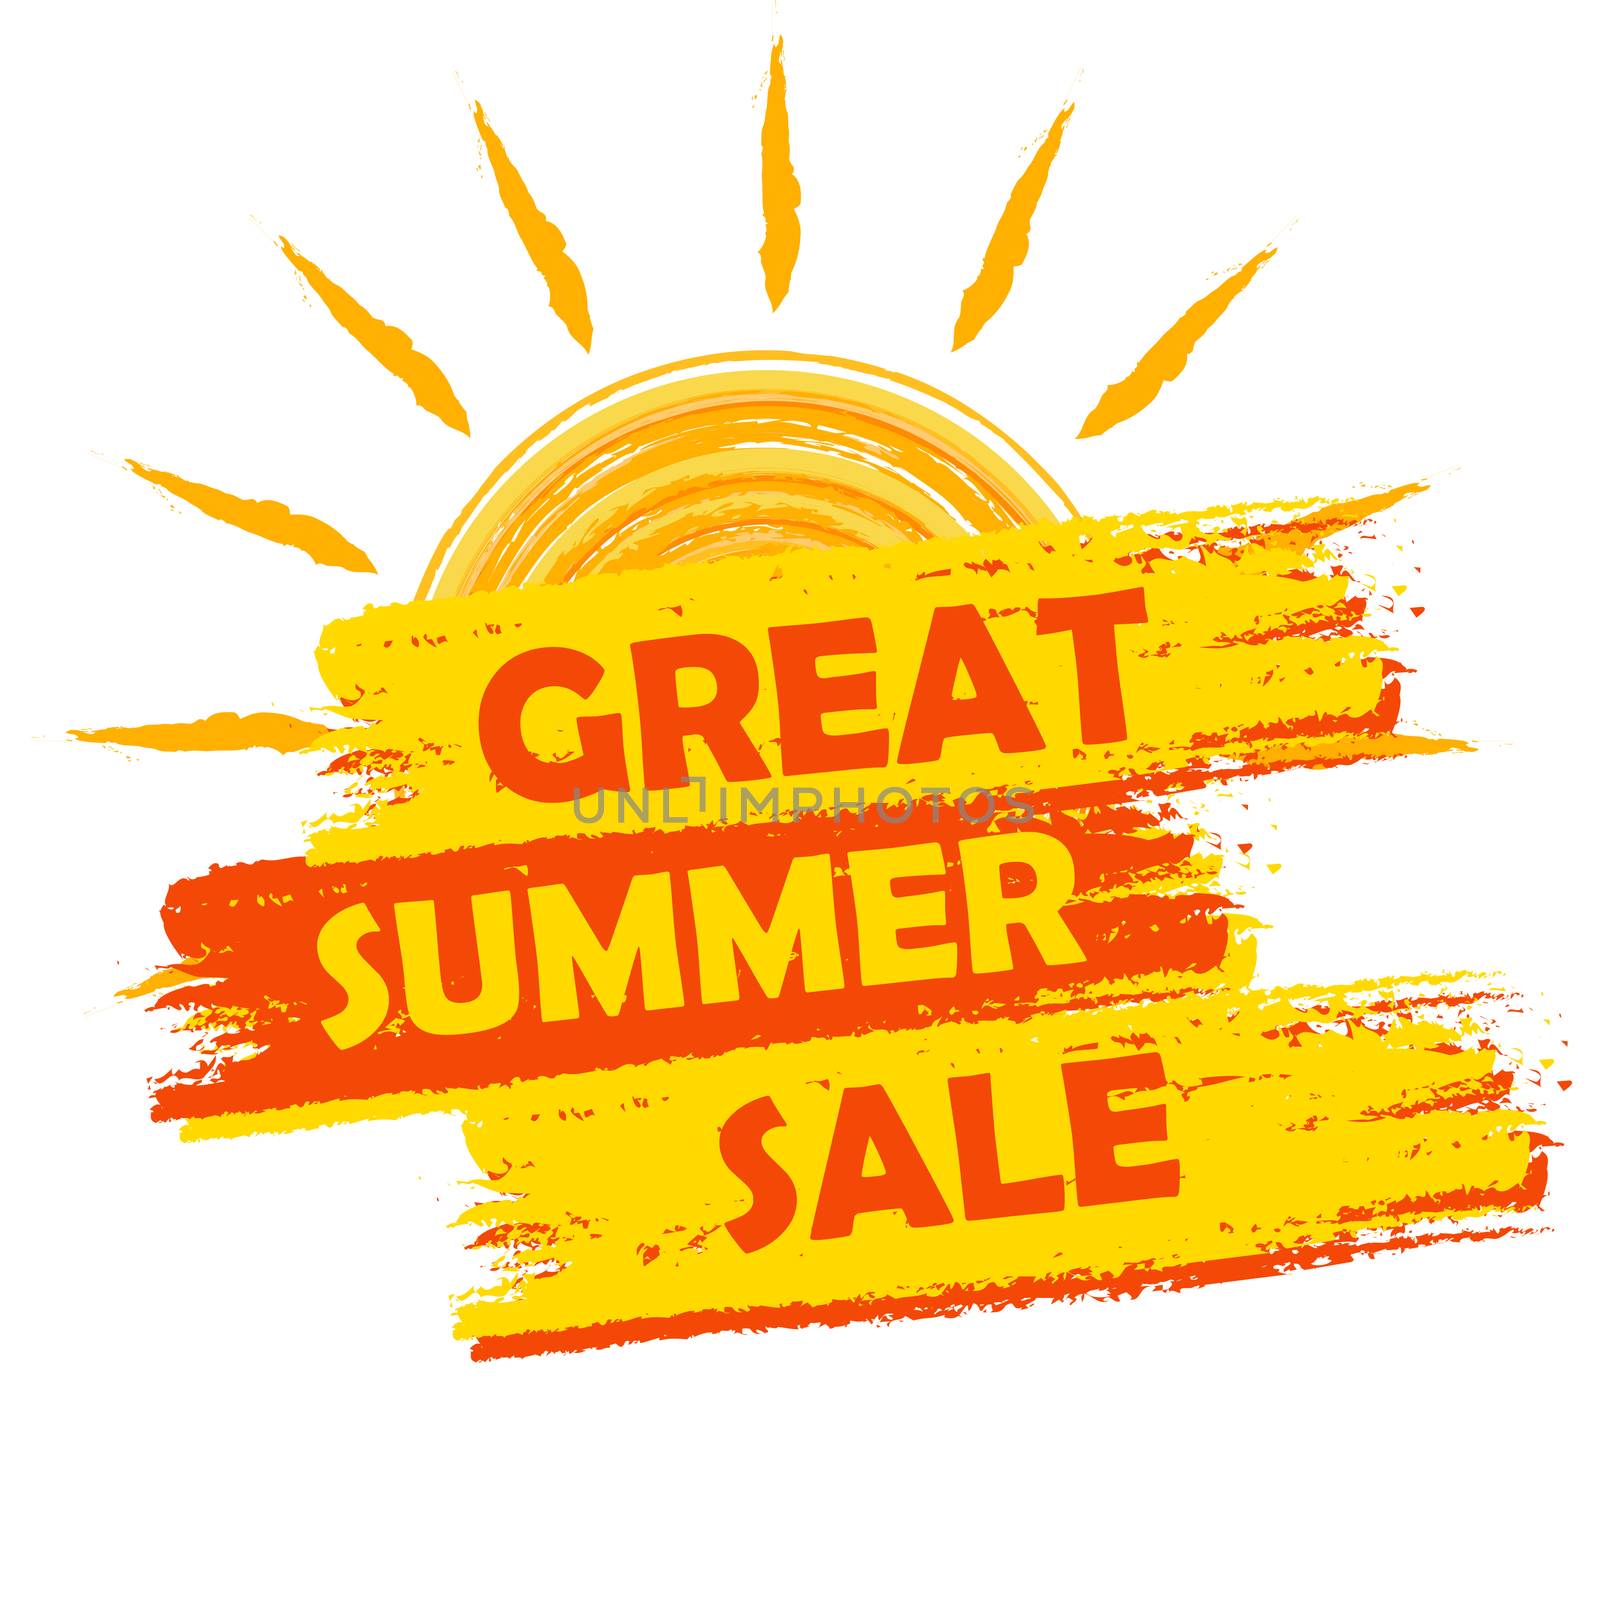 great summer sale banner - text in yellow and orange drawn label with sun symbol, business seasonal shopping concept